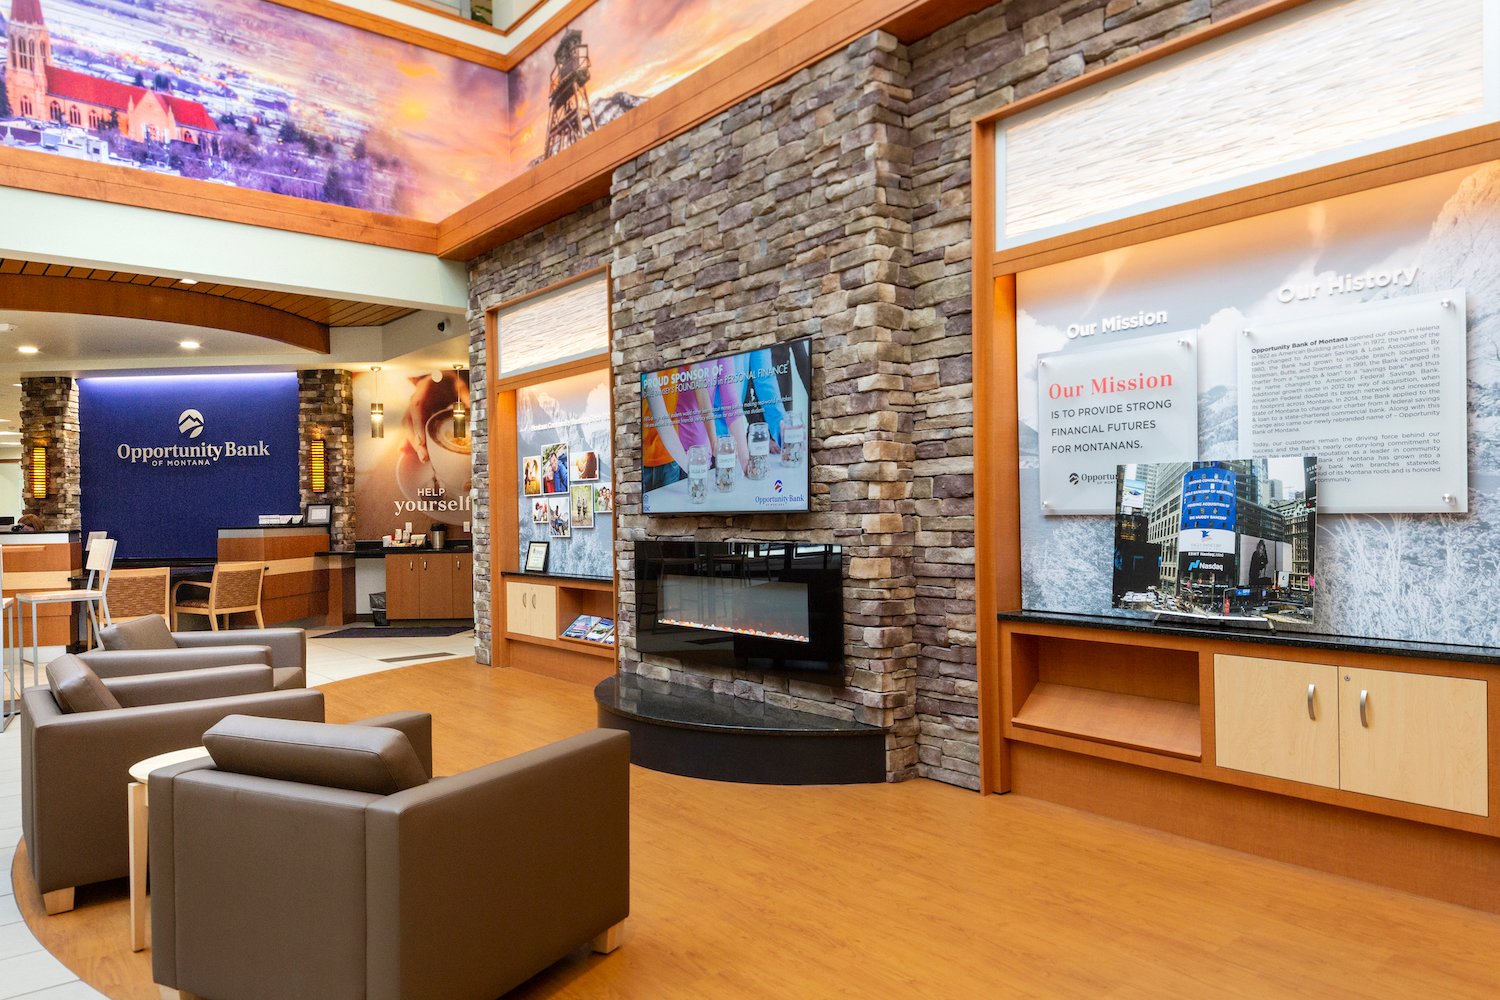 Image of the waiting area inside Opportunity Bank in Helena, Montana, which displays the company's mission and history.